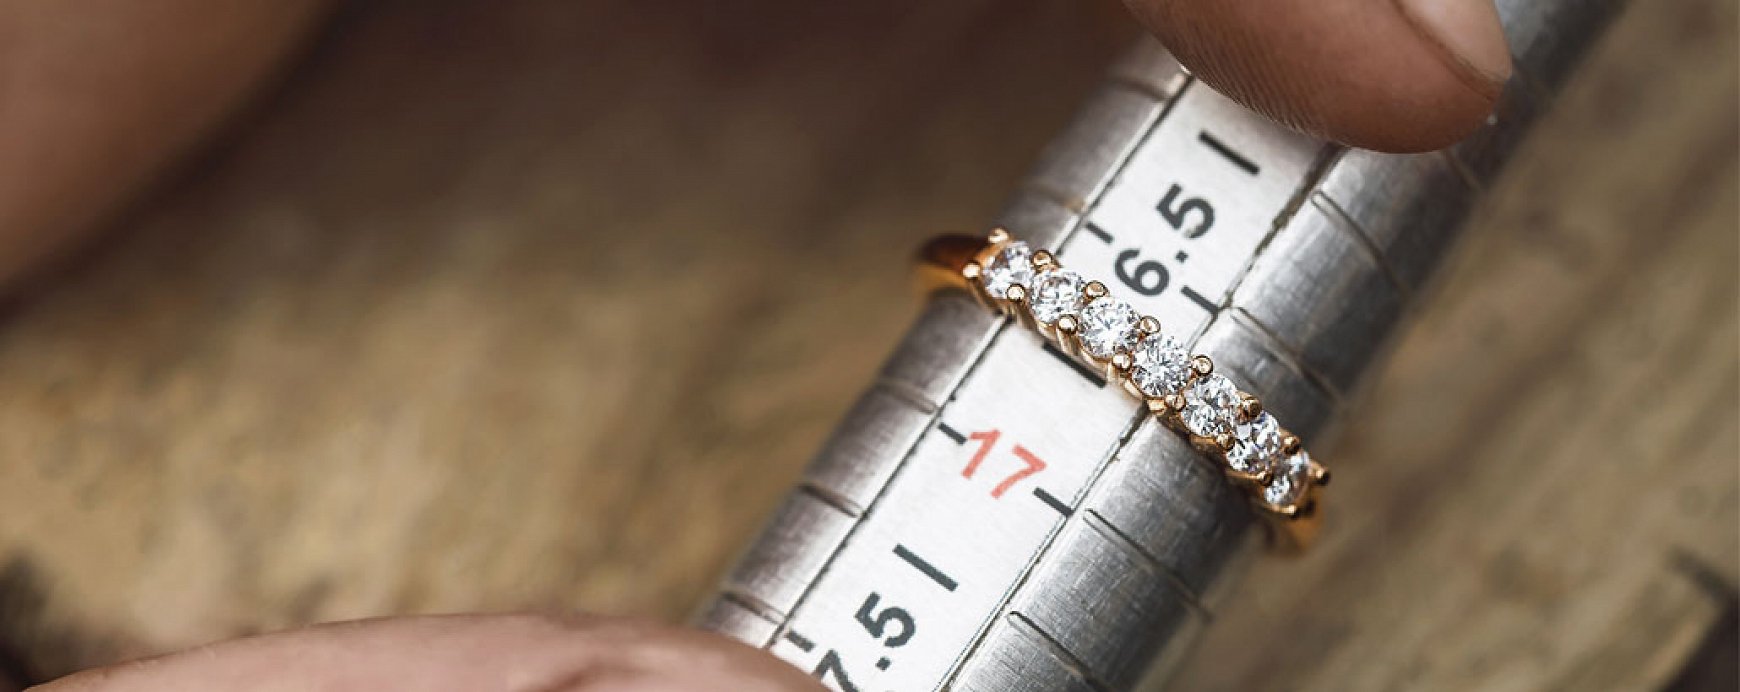 Ring Size Chart - How to Measure Your Ring Size